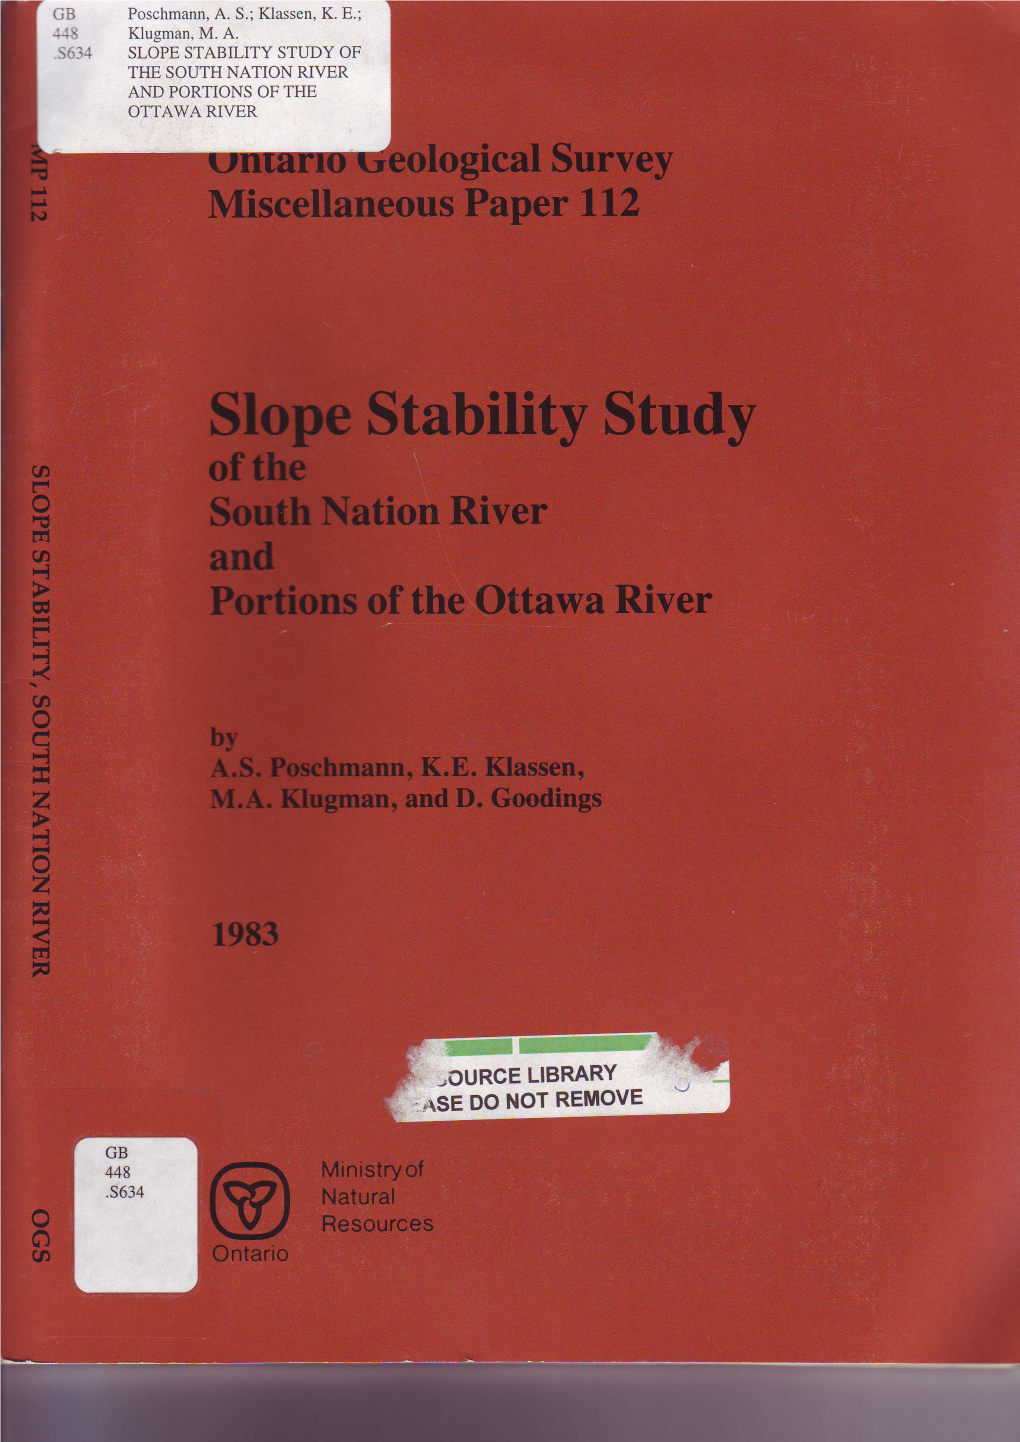 Slope Stability Study of the South Nation River and Portions of The